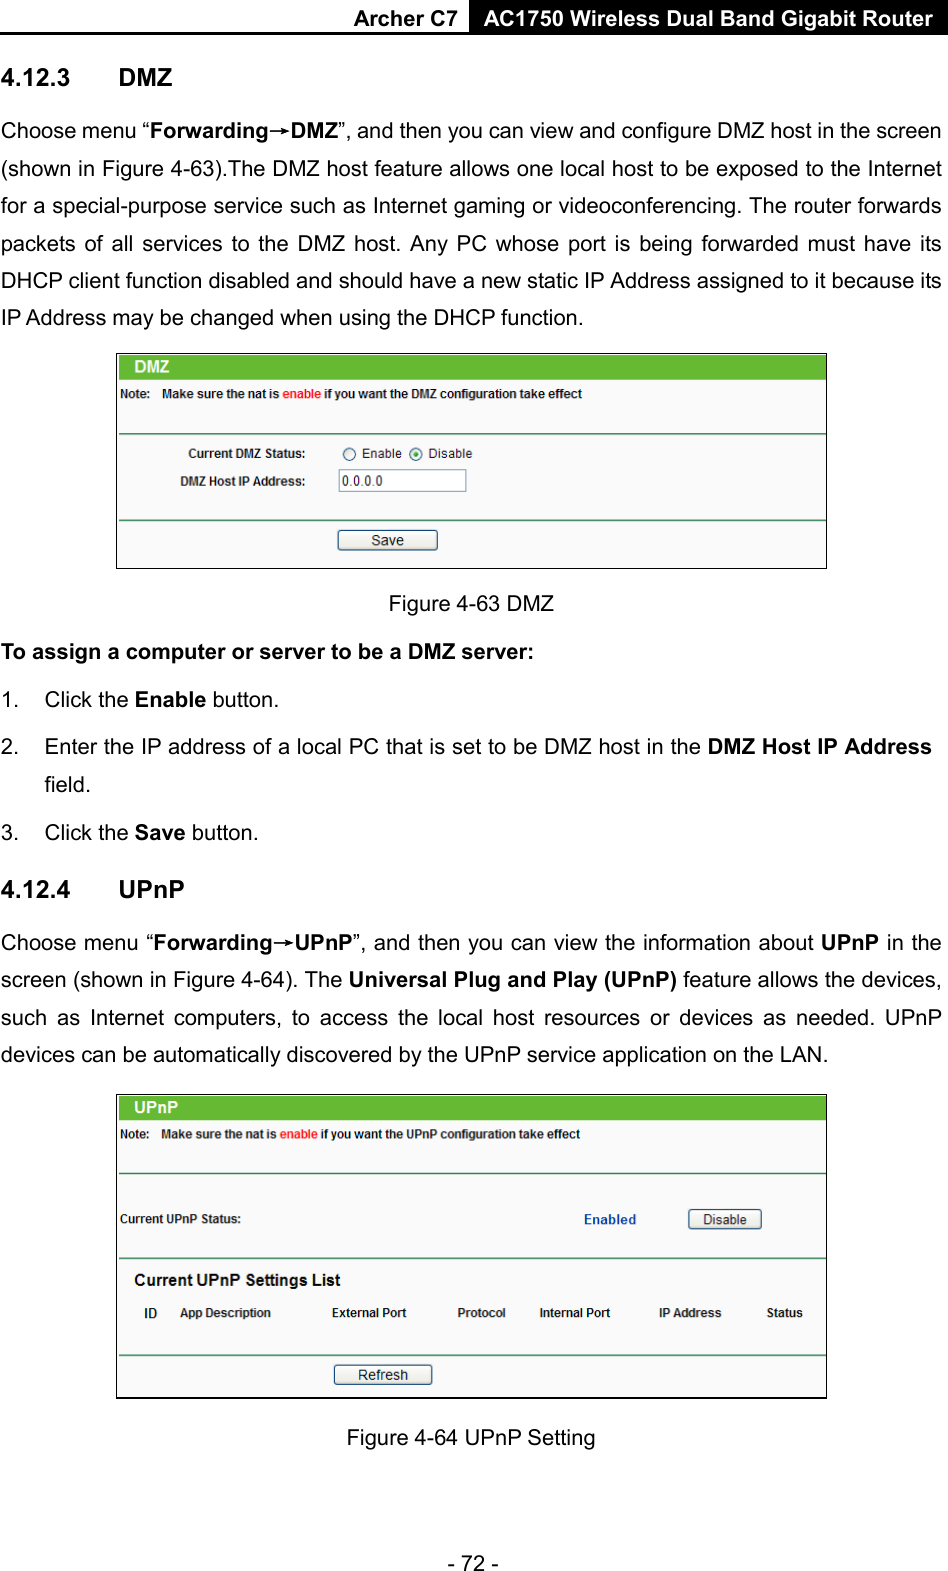 Archer C7 AC1750 Wireless Dual Band Gigabit Router  - 72 - 4.12.3 DMZ Choose menu “Forwarding→DMZ”, and then you can view and configure DMZ host in the screen (shown in Figure 4-63).The DMZ host feature allows one local host to be exposed to the Internet for a special-purpose service such as Internet gaming or videoconferencing. The router forwards packets of all services to the DMZ host. Any PC whose port is being forwarded must have its DHCP client function disabled and should have a new static IP Address assigned to it because its IP Address may be changed when using the DHCP function.  Figure 4-63 DMZ To assign a computer or server to be a DMZ server:   1. Click the Enable button.   2. Enter the IP address of a local PC that is set to be DMZ host in the DMZ Host IP Address field.   3. Click the Save button.   4.12.4 UPnP Choose menu “Forwarding→UPnP”, and then you can view the information about UPnP in the screen (shown in Figure 4-64). The Universal Plug and Play (UPnP) feature allows the devices, such as Internet computers, to access the local host resources or devices as needed. UPnP devices can be automatically discovered by the UPnP service application on the LAN.  Figure 4-64 UPnP Setting 